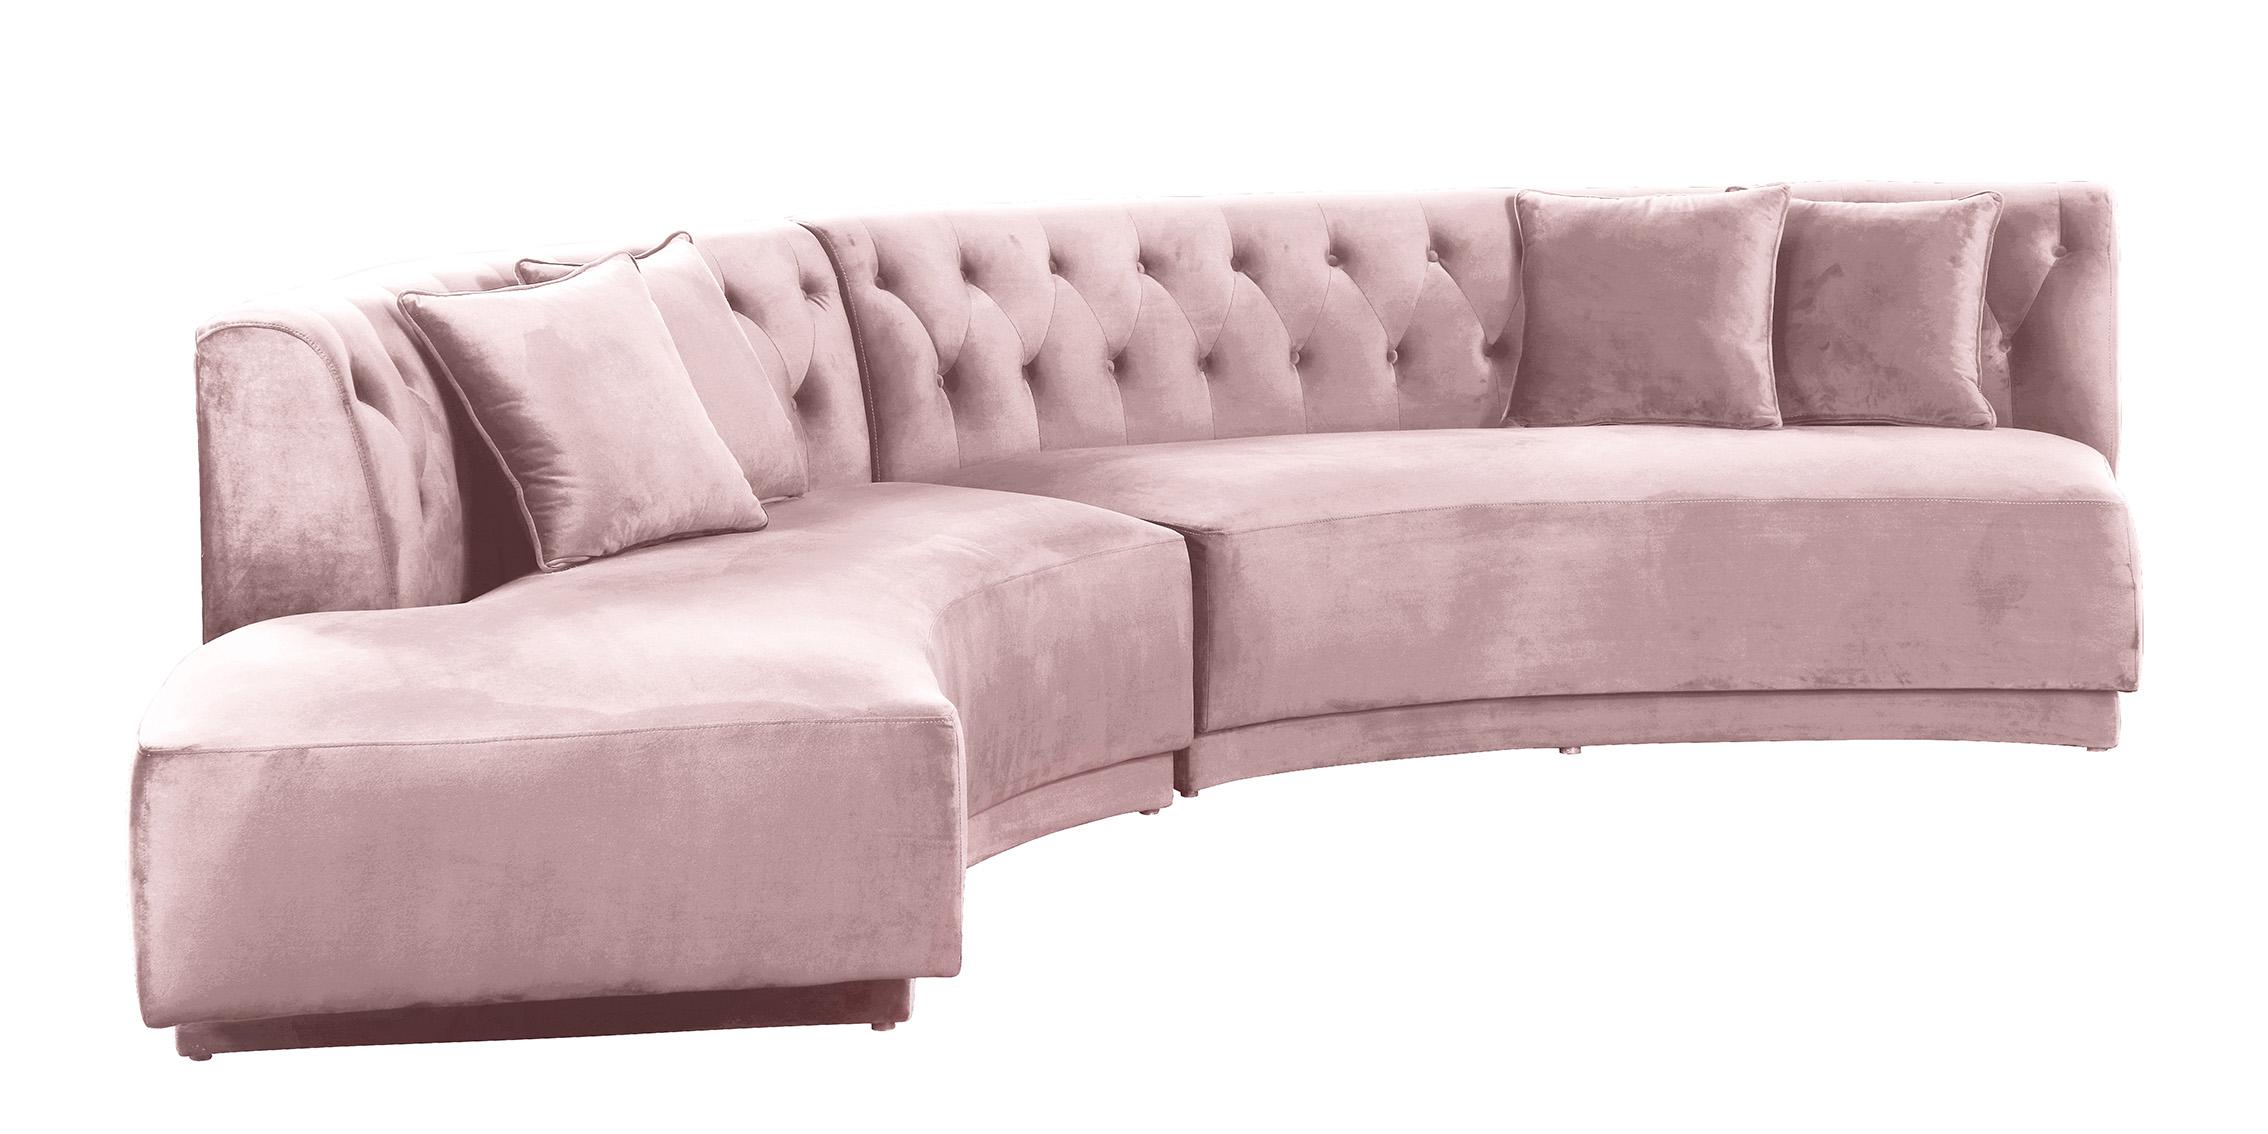 Contemporary, Modern Sectional Sofa KENZI 641Pink 641Pink-Sectional in Pink Velvet